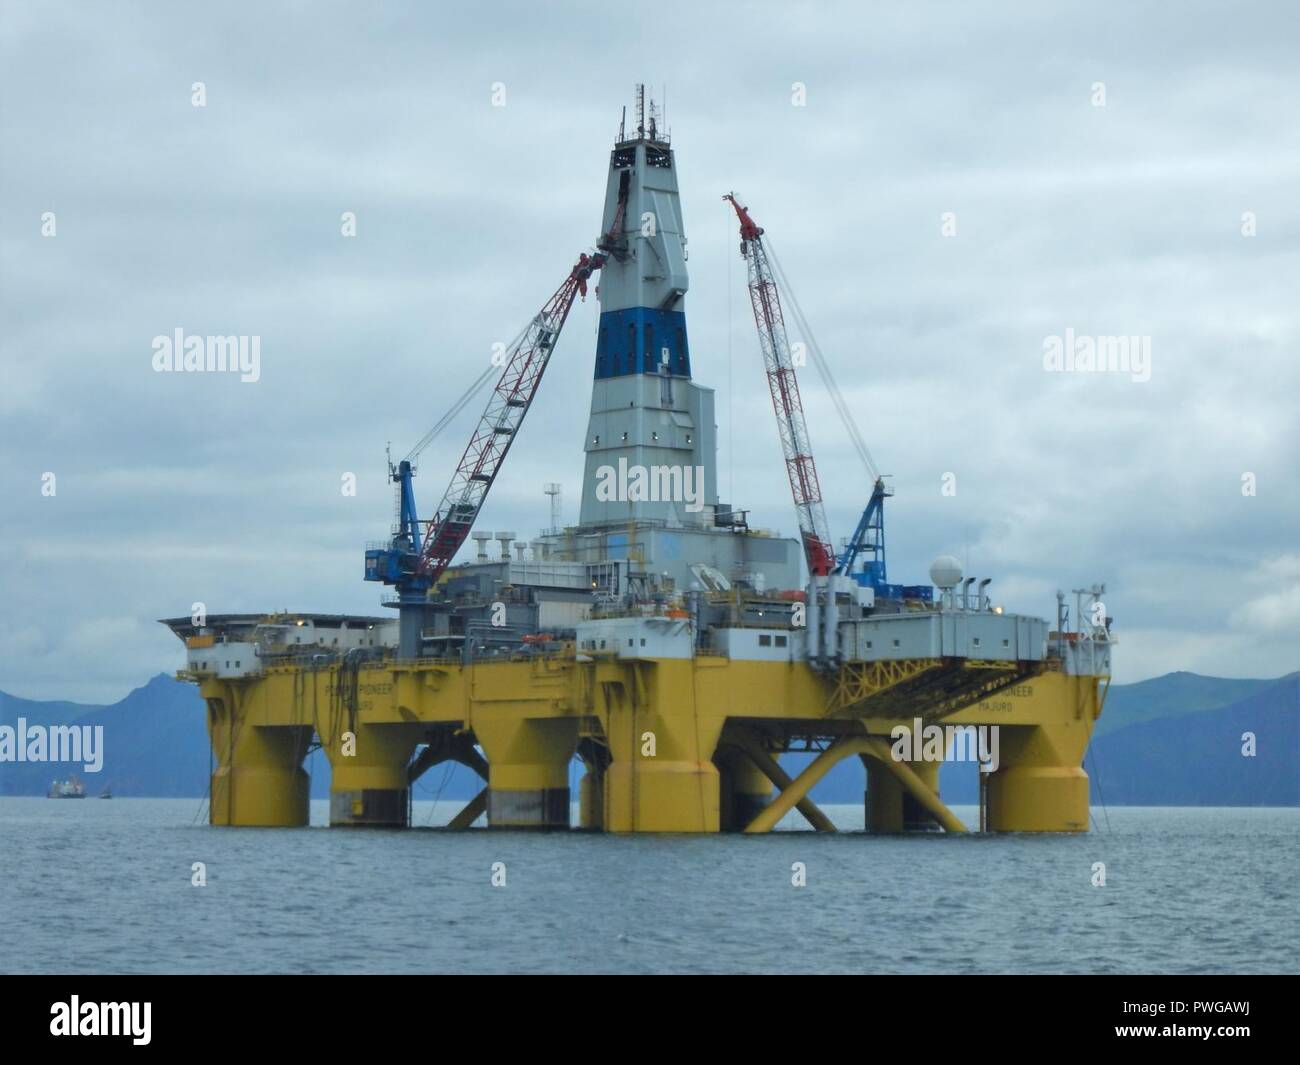 BSEE Approves Limited Drilling Activities in Arctic Waters Under Rigorous Safety Requirements Stock Photo